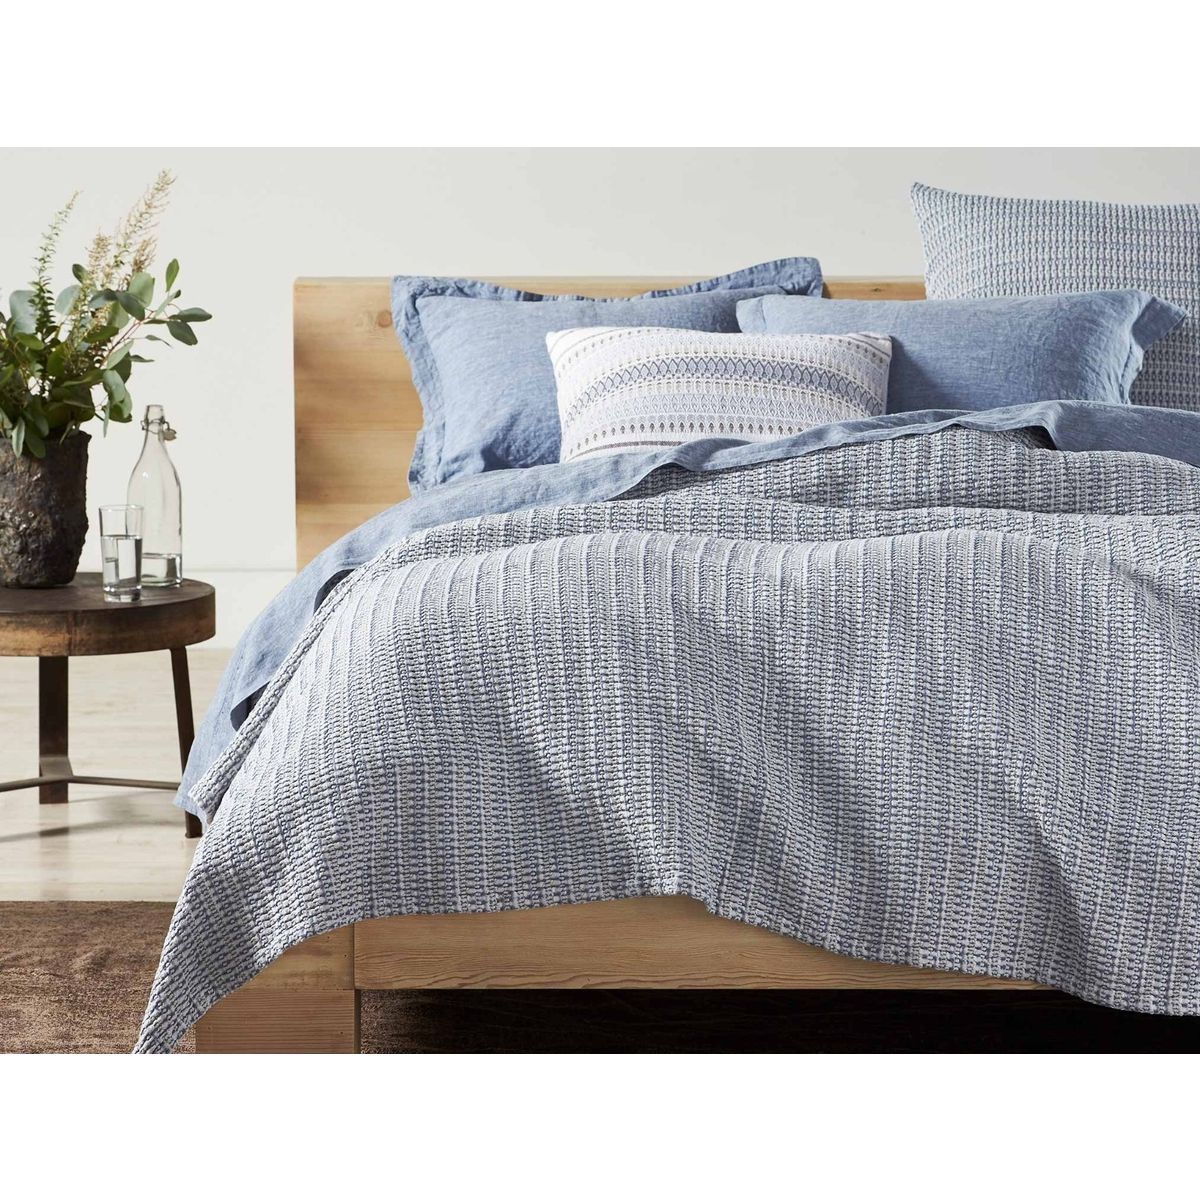 Coyuchi 40 Percent Off Bedding Winter Clearance Sale January 2020